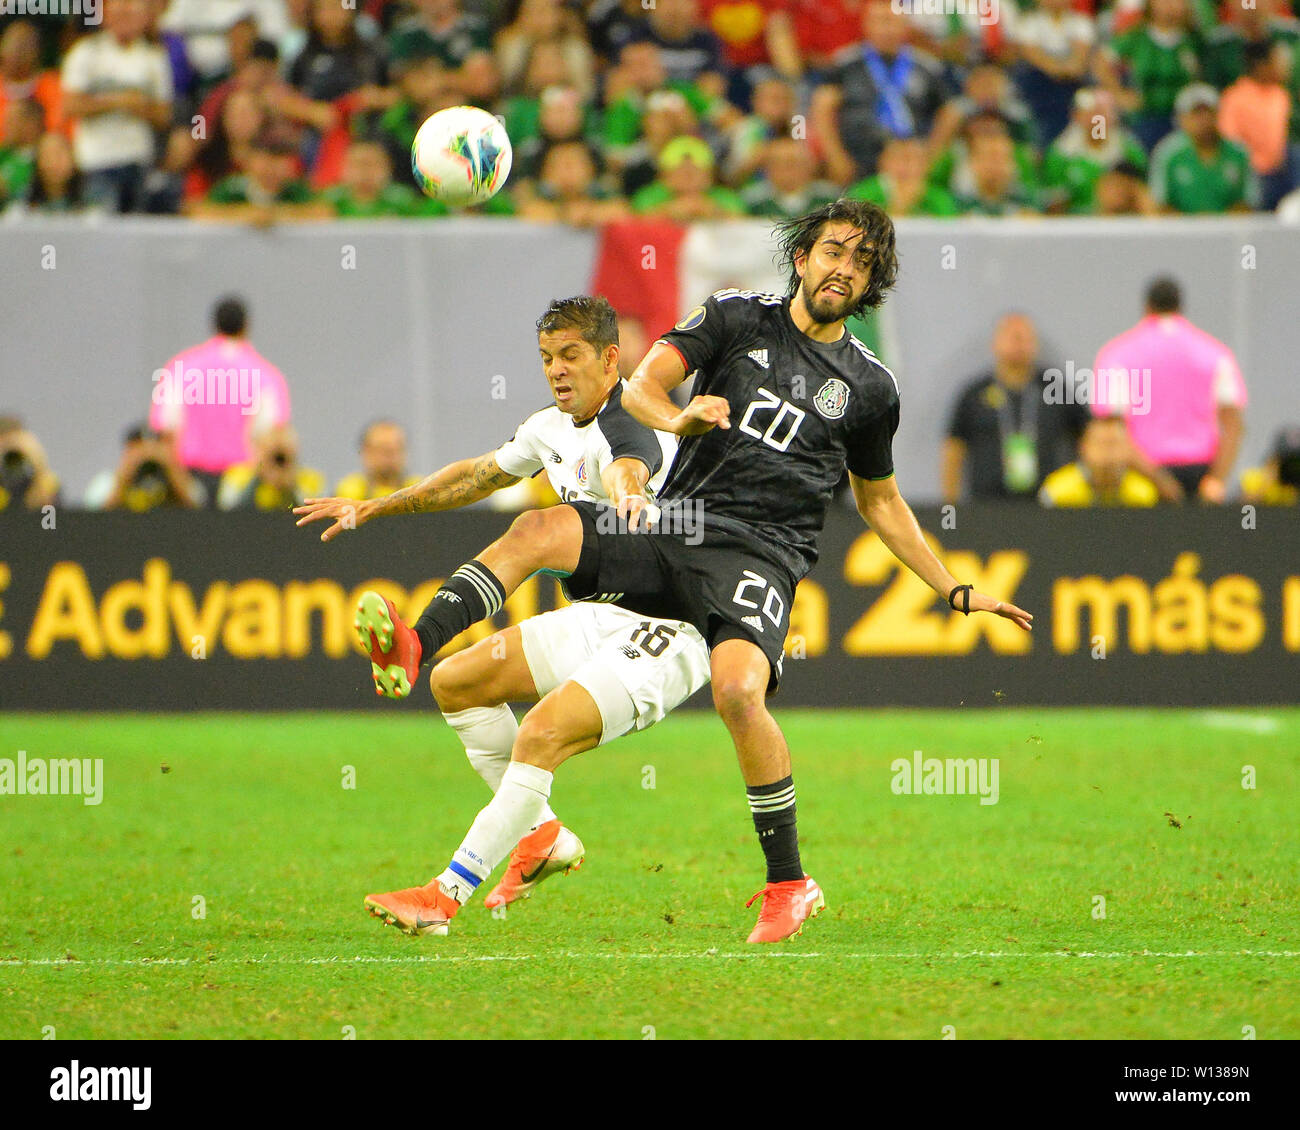 Houston, TX, USA. 29th June, 2019. Mexico forward, Rodolfo Pizarro (20), and Costa Rica defender, Christian Gamboa (16), work to bring the ball under control during the 2019 CONCACAF Gold Cup, quarter final match between Mexico and Costa Rica, at NRG Stadium in Houston, TX. Mandatory Credit: Kevin Langley/Sports South Media/CSM/Alamy Live News Stock Photo